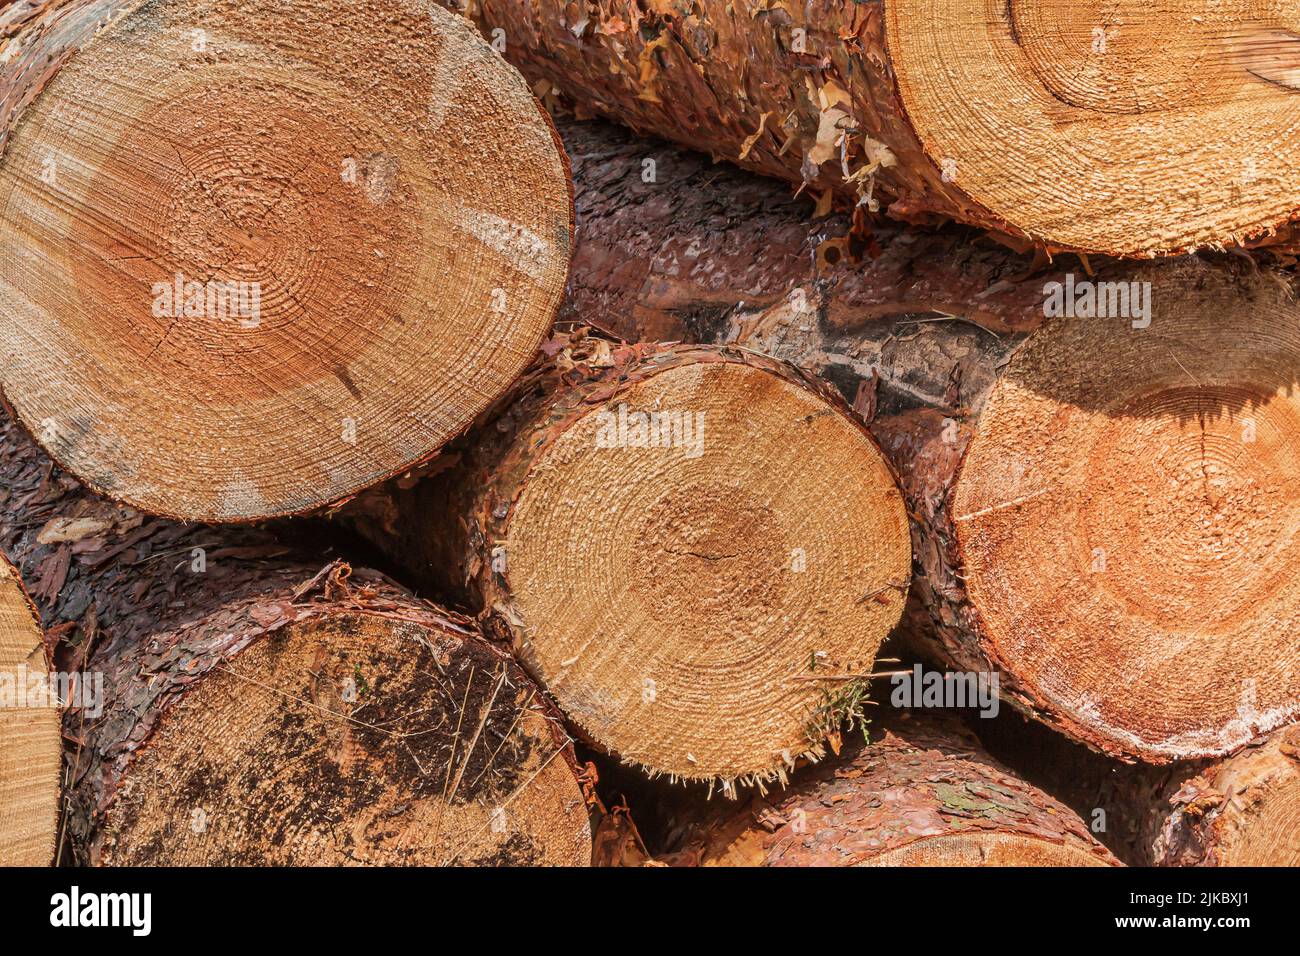 several large sawed logs in a heap. Stack of pine logs with barks after felling in the forest. Annual rings in cross-section in reddish, brown, yellow Stock Photo